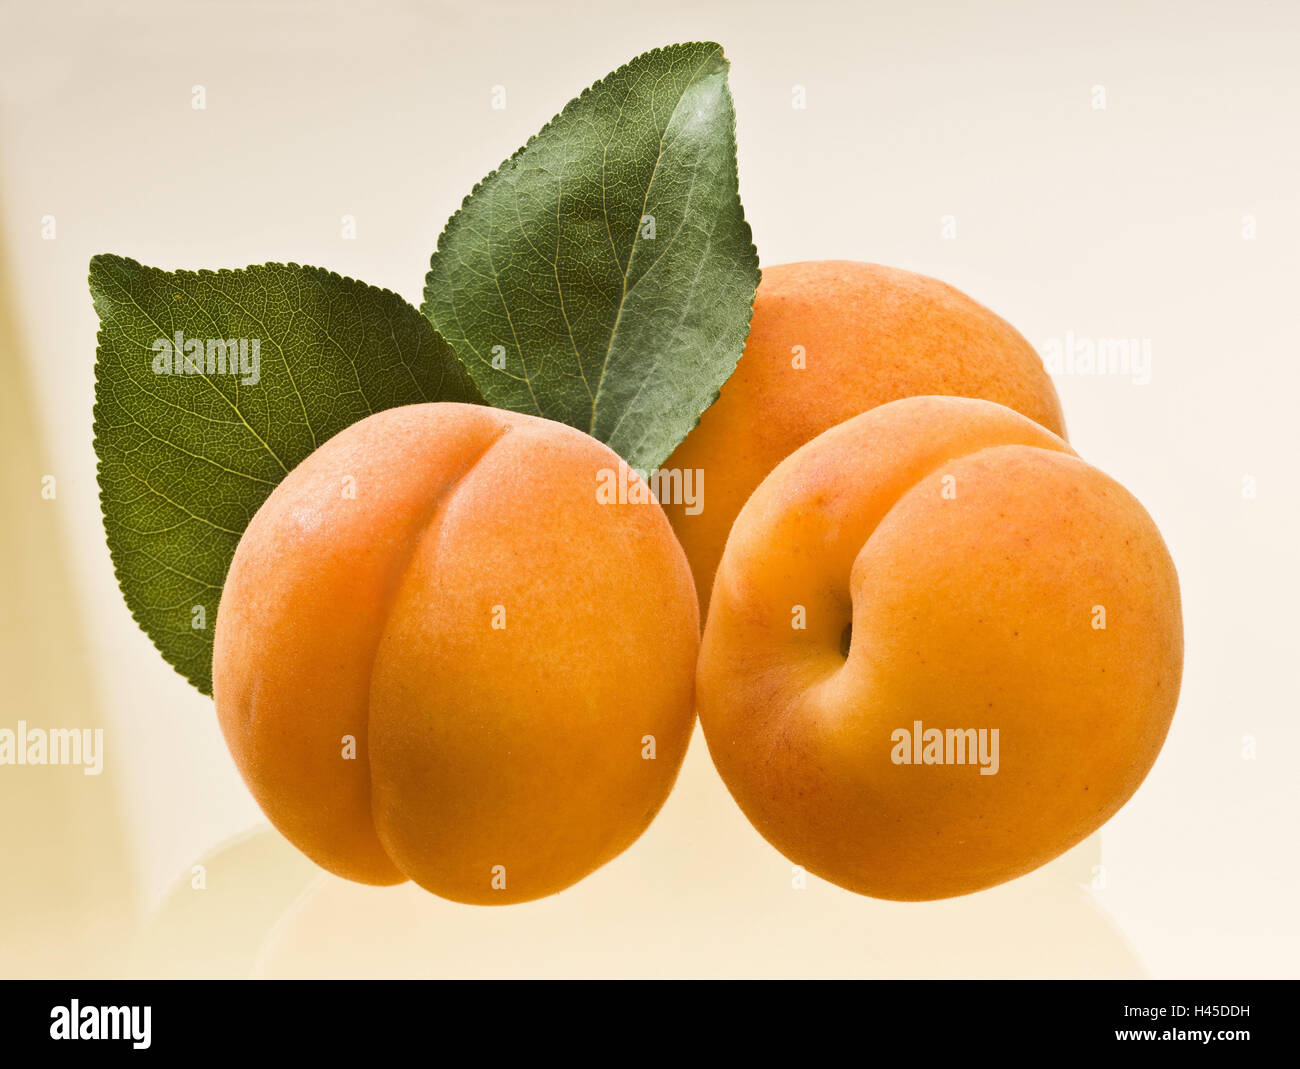 Apricots, Prunus armeniaca, cut out, apricots, leaves, studio, rich in vitamins, rich in aroma, low-calorie, healthy, yellow, green, three, fruit, fruits, plant, Stock Photo